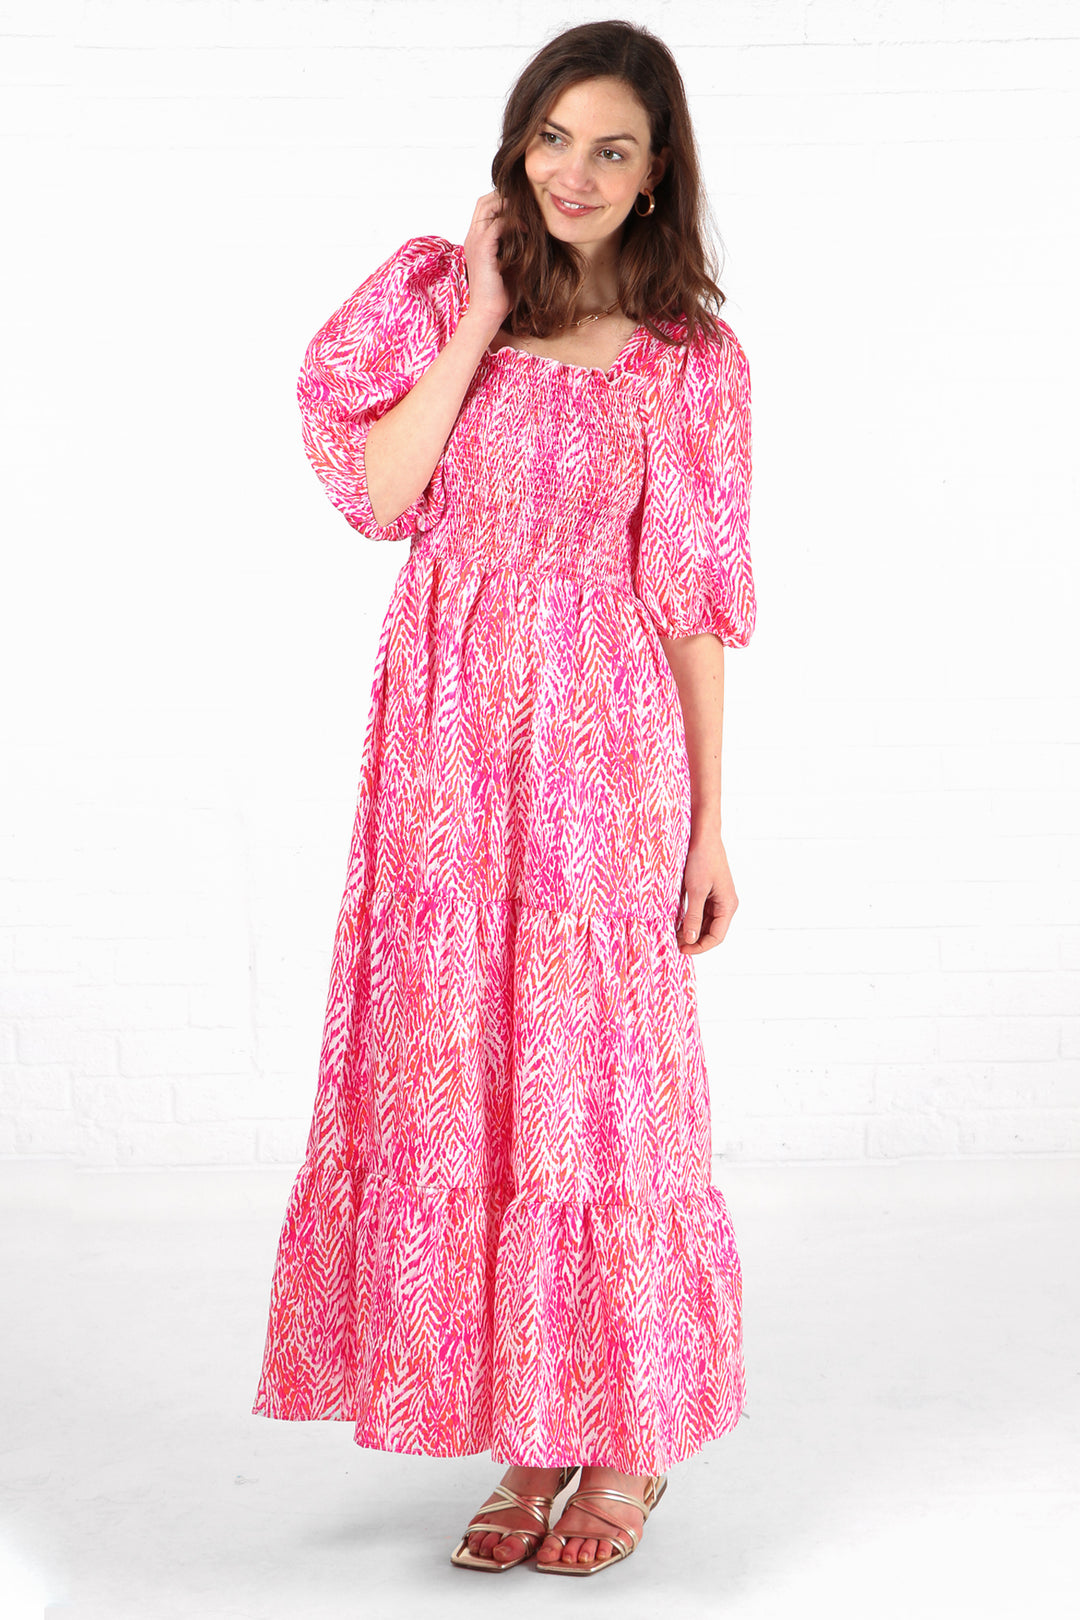 model wearing a maxi length puff sleeve tired milkmaid dress with an all over pink chevron pattern